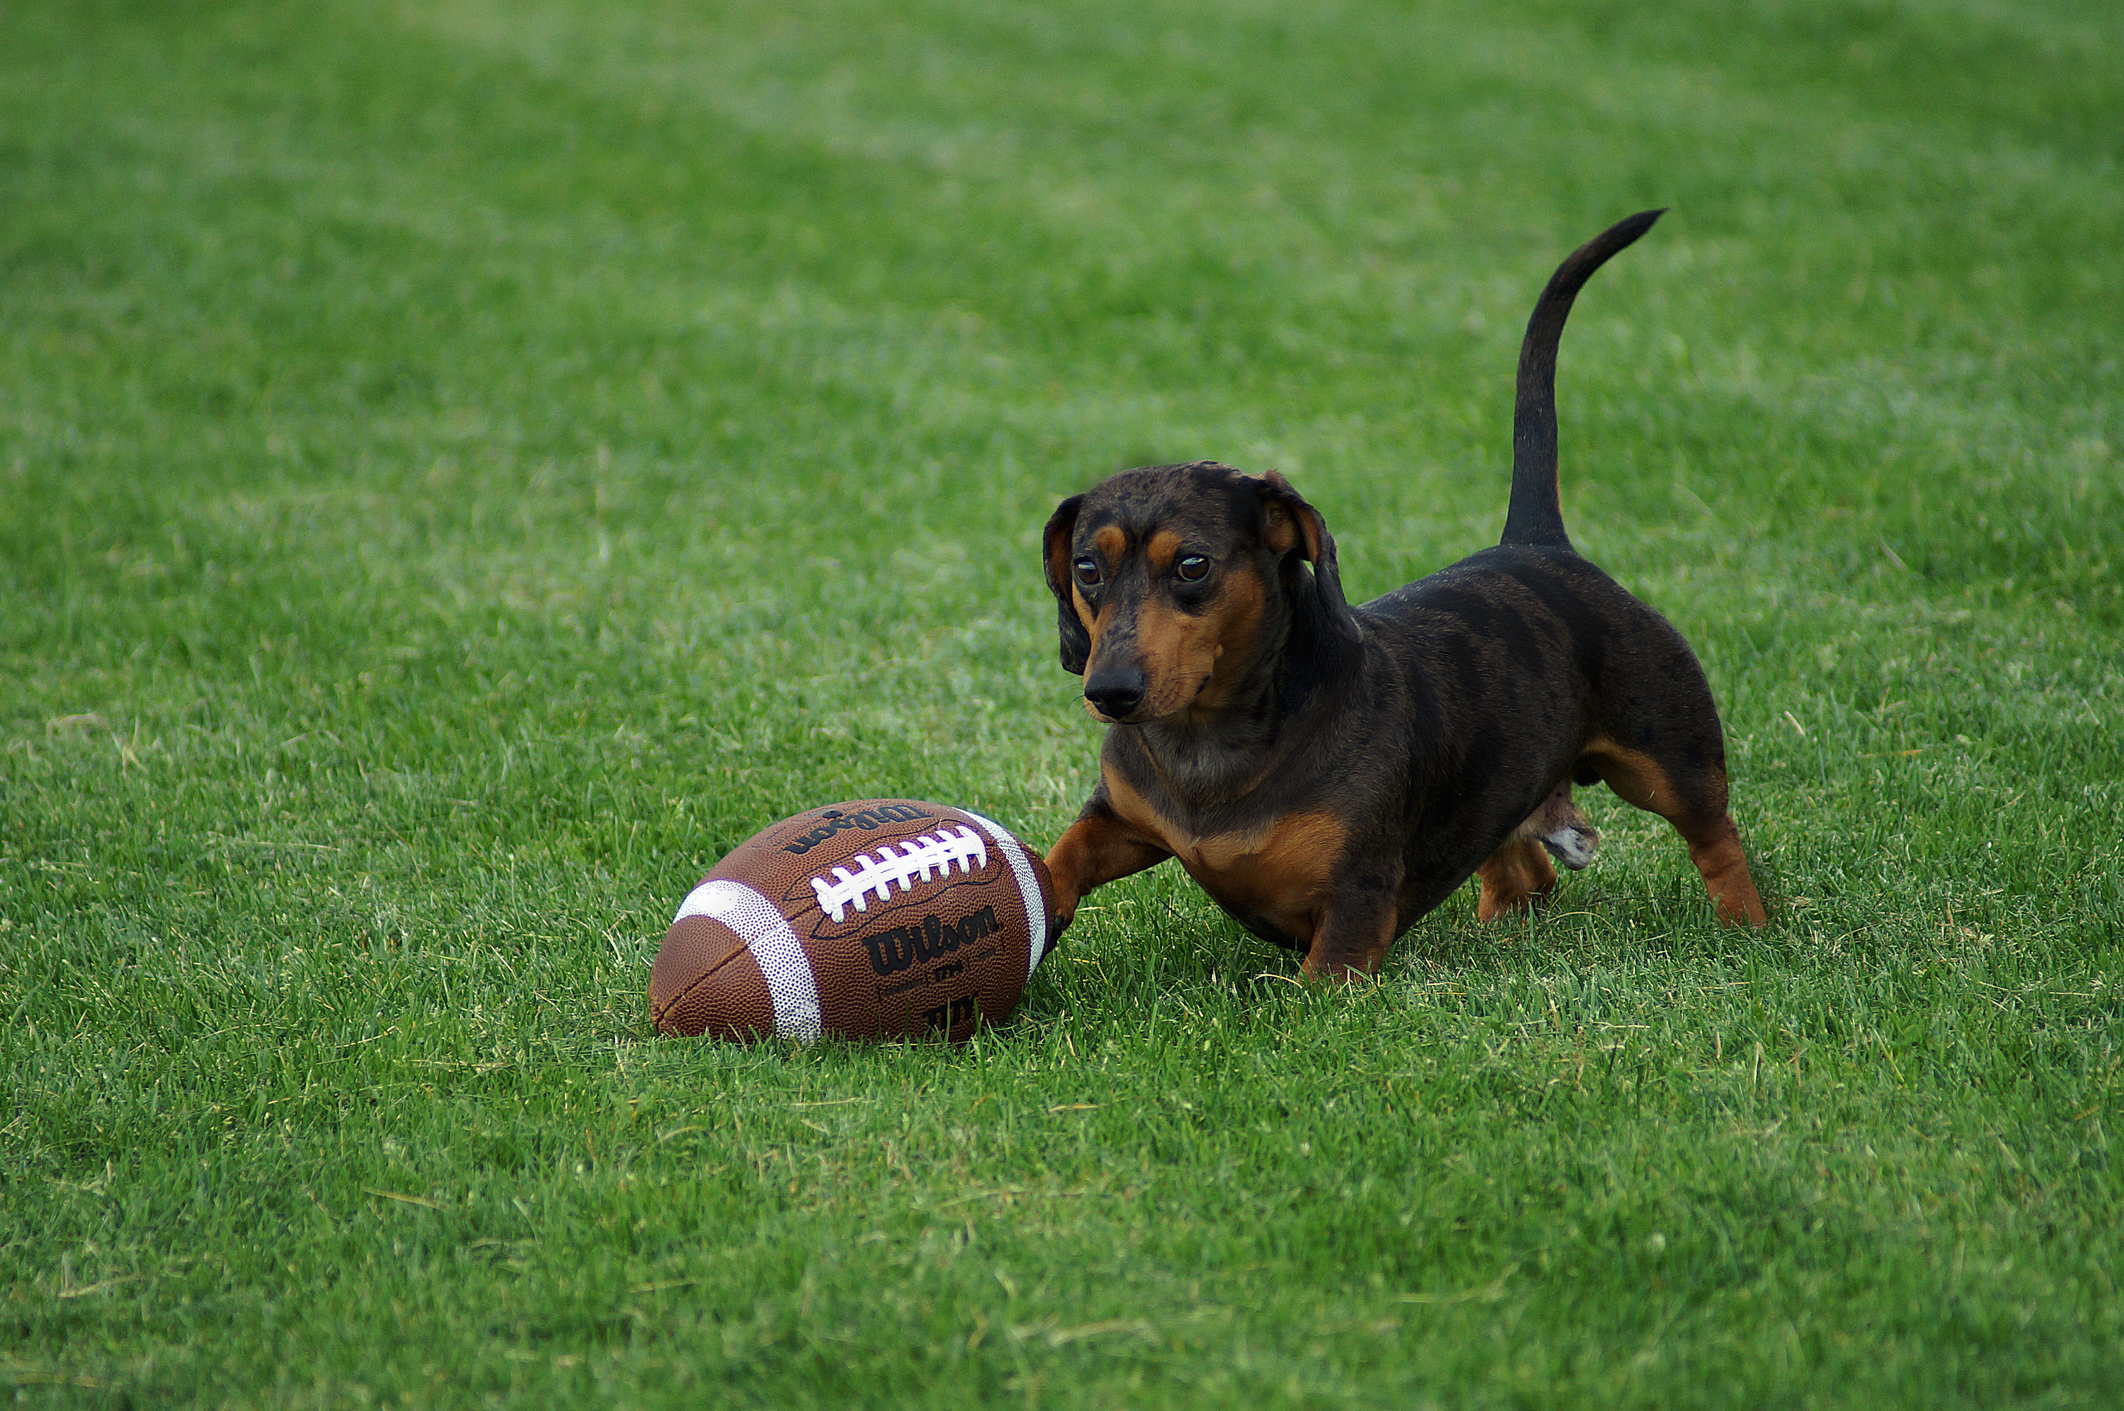 Football Dog Goes For A Touchdown! 